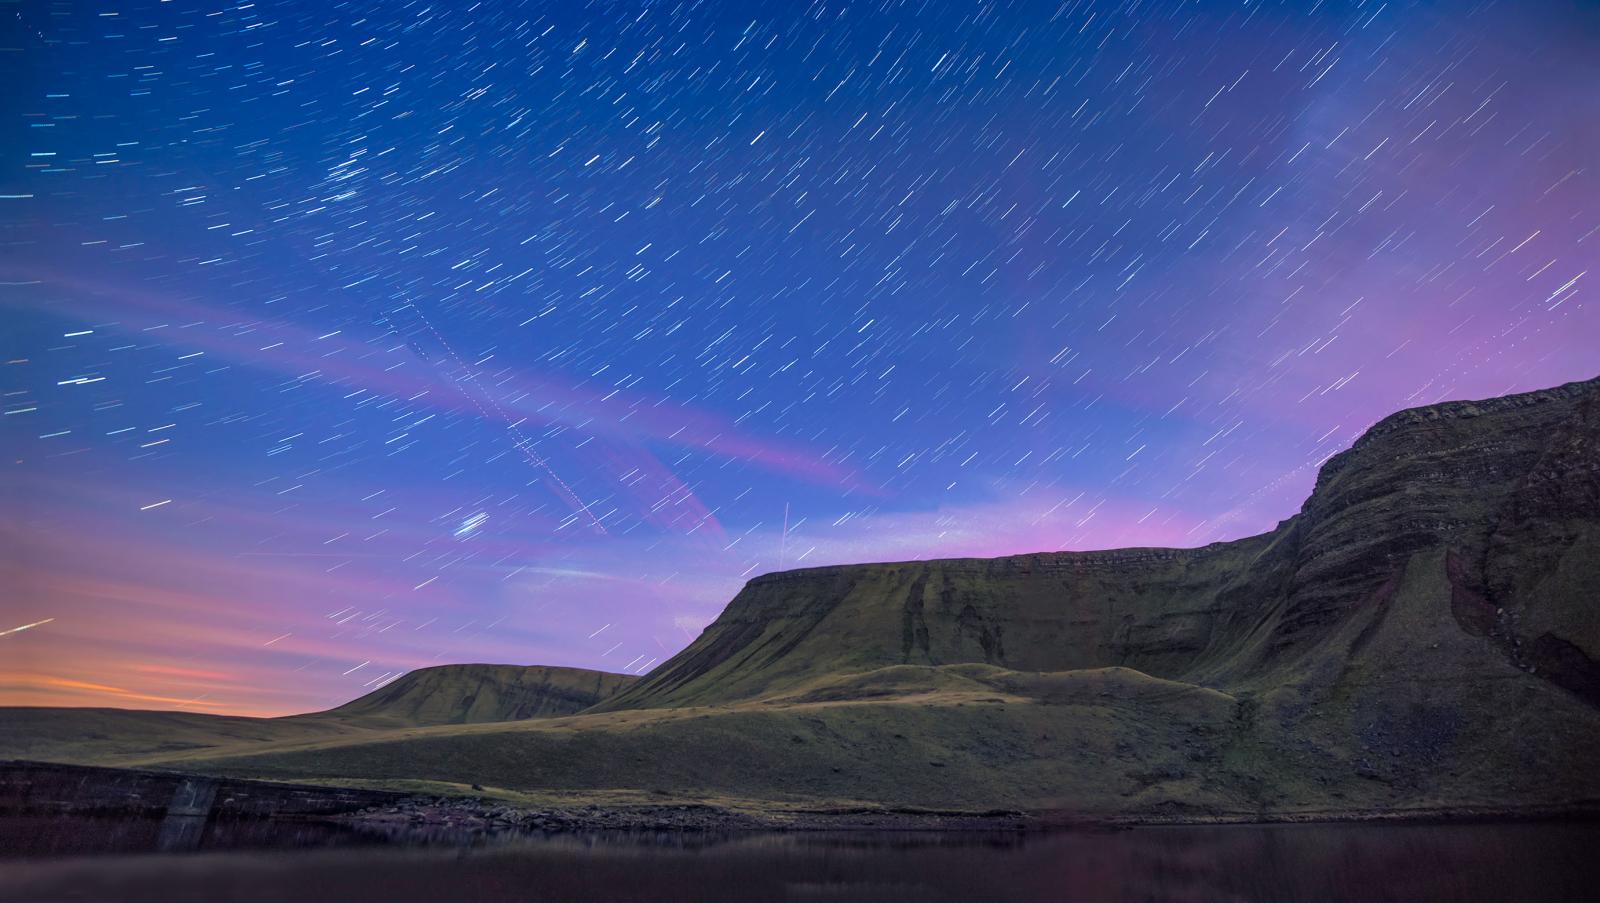 Outline of lake and mountain backdrop against a dark blue and purple night sky, dotted with blurry stars